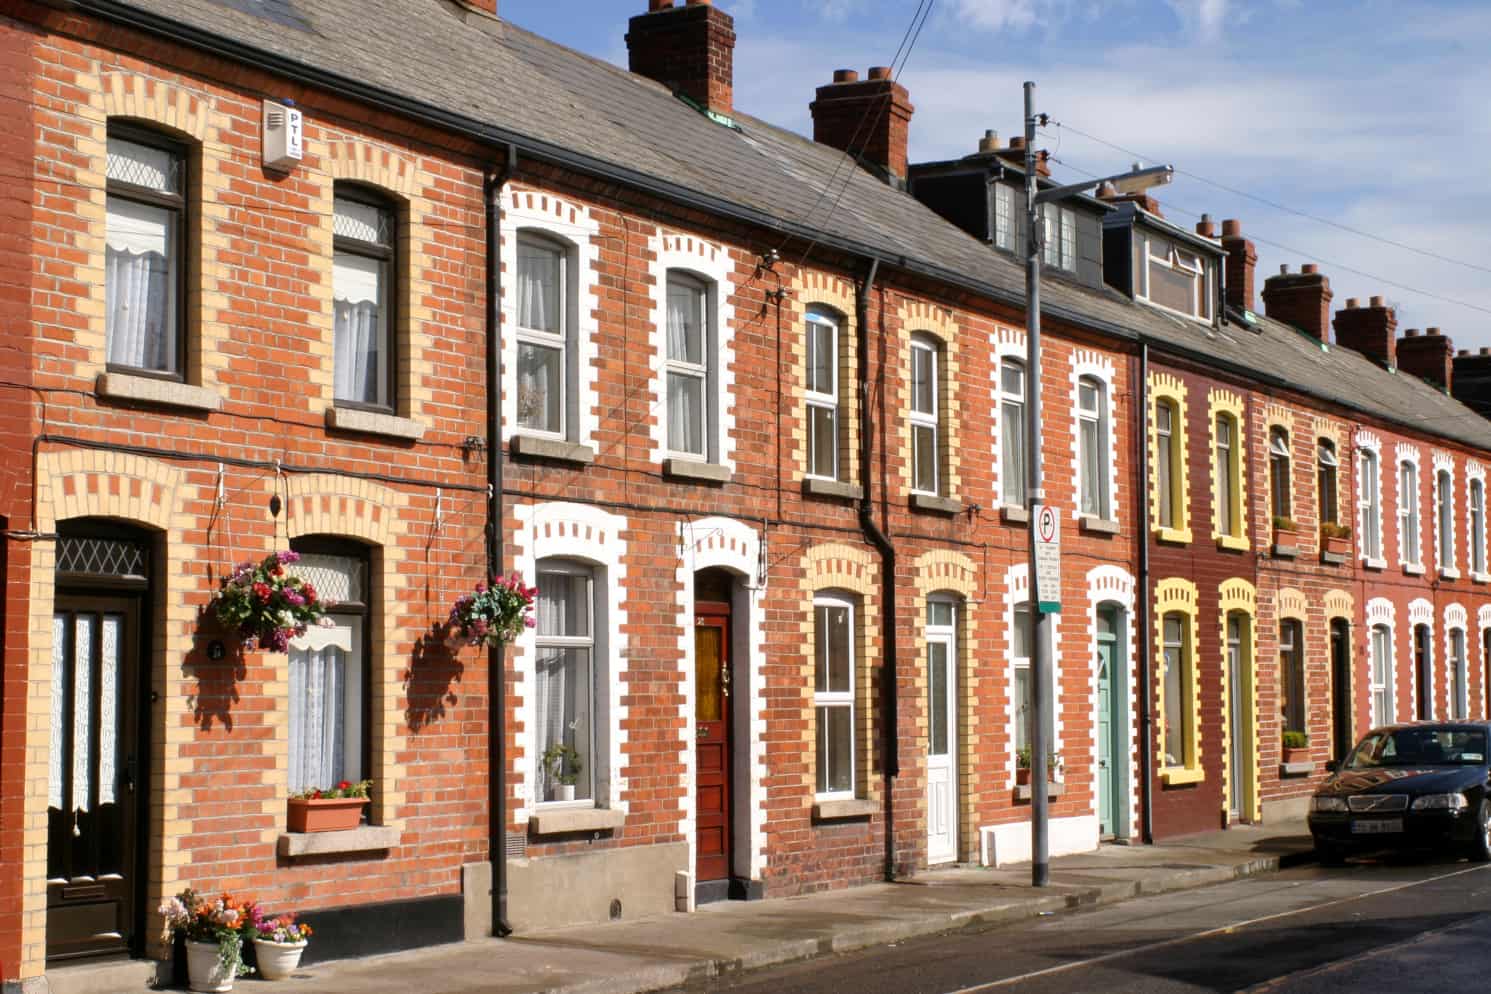 Typical Dublin red brick houses